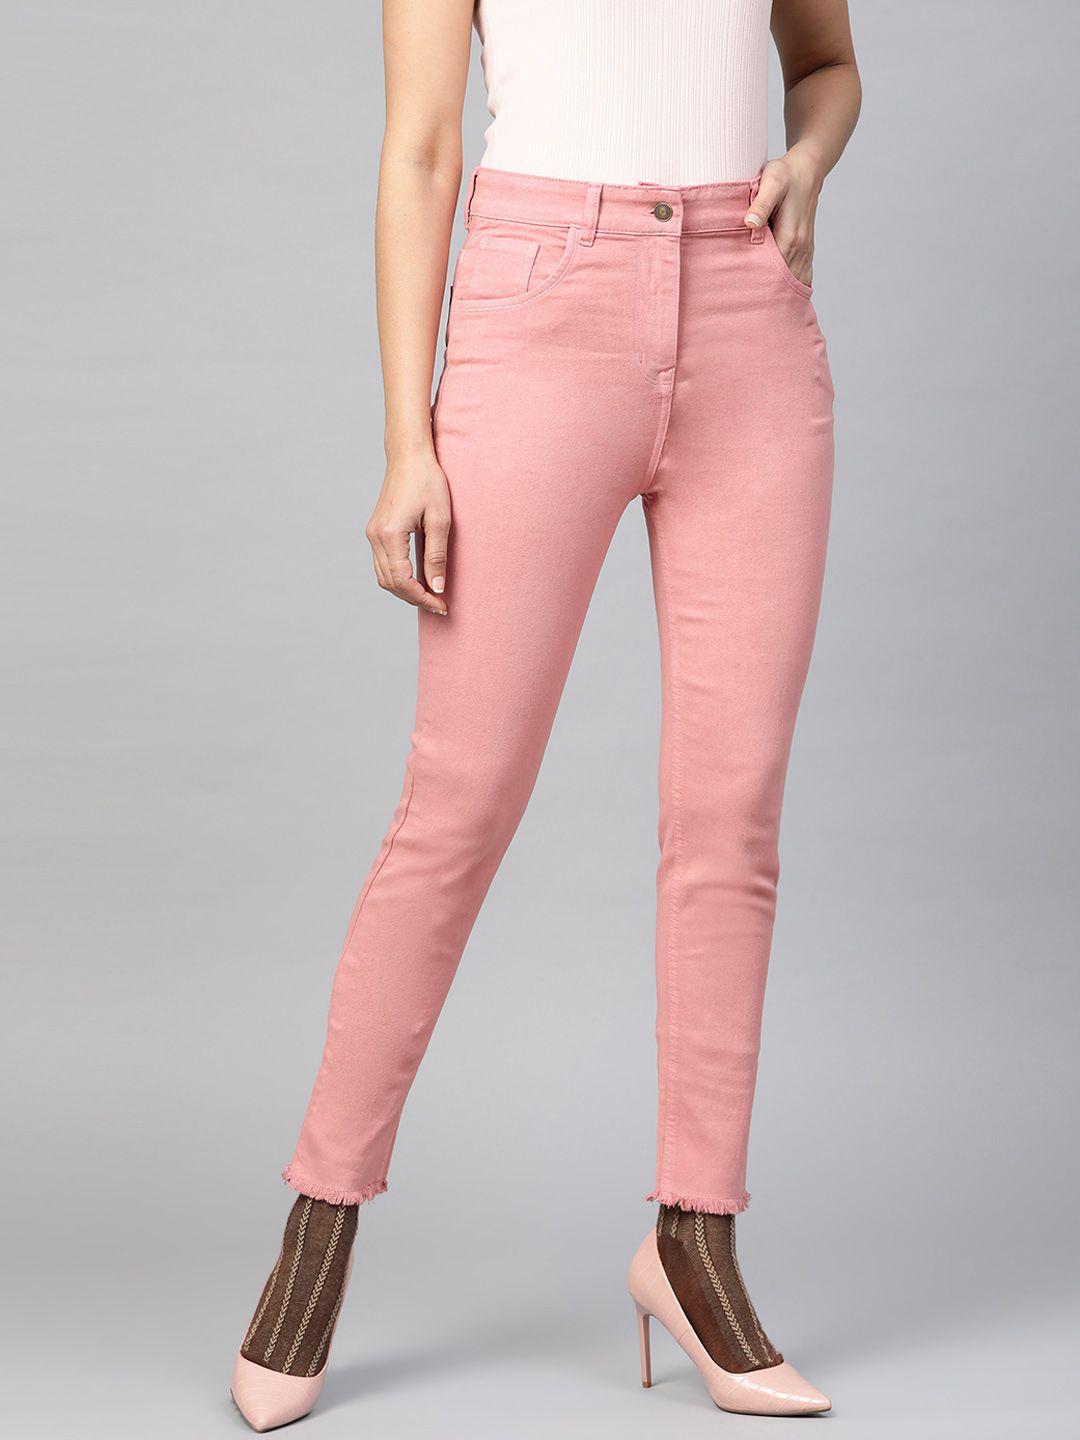 sassafras-women-pink-slim-fit-high-rise-clean-look-stretchable-cropped-jeans